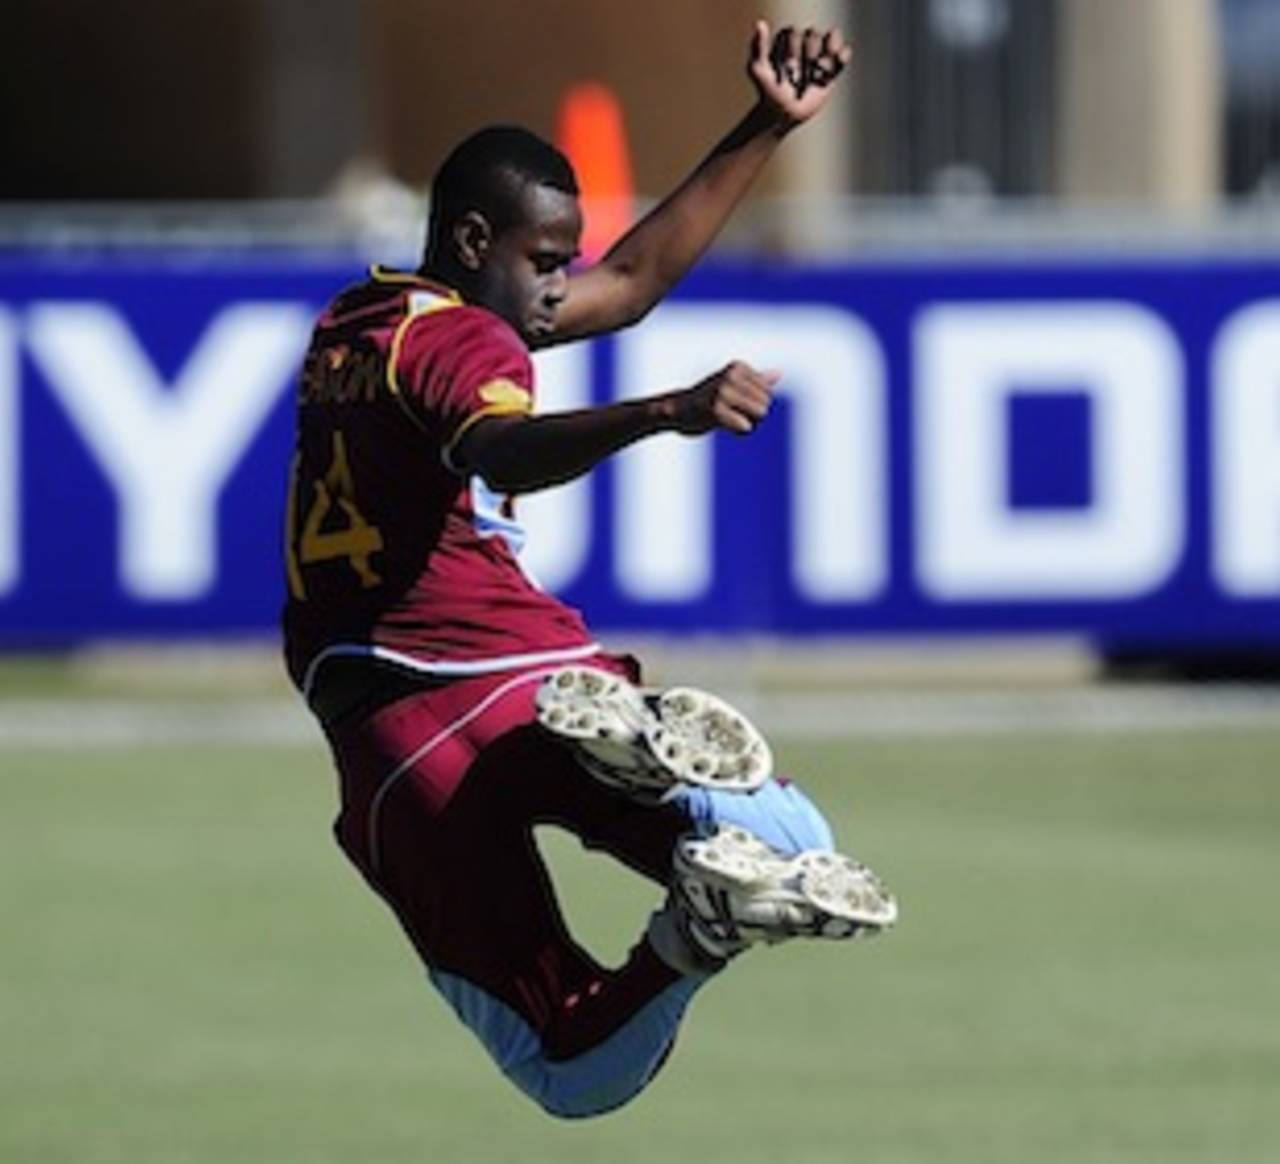 Ronsford Beaton has set the pace for the West Indies team, reaching speeds of up to 145 kph&nbsp;&nbsp;&bull;&nbsp;&nbsp;ICC/Getty